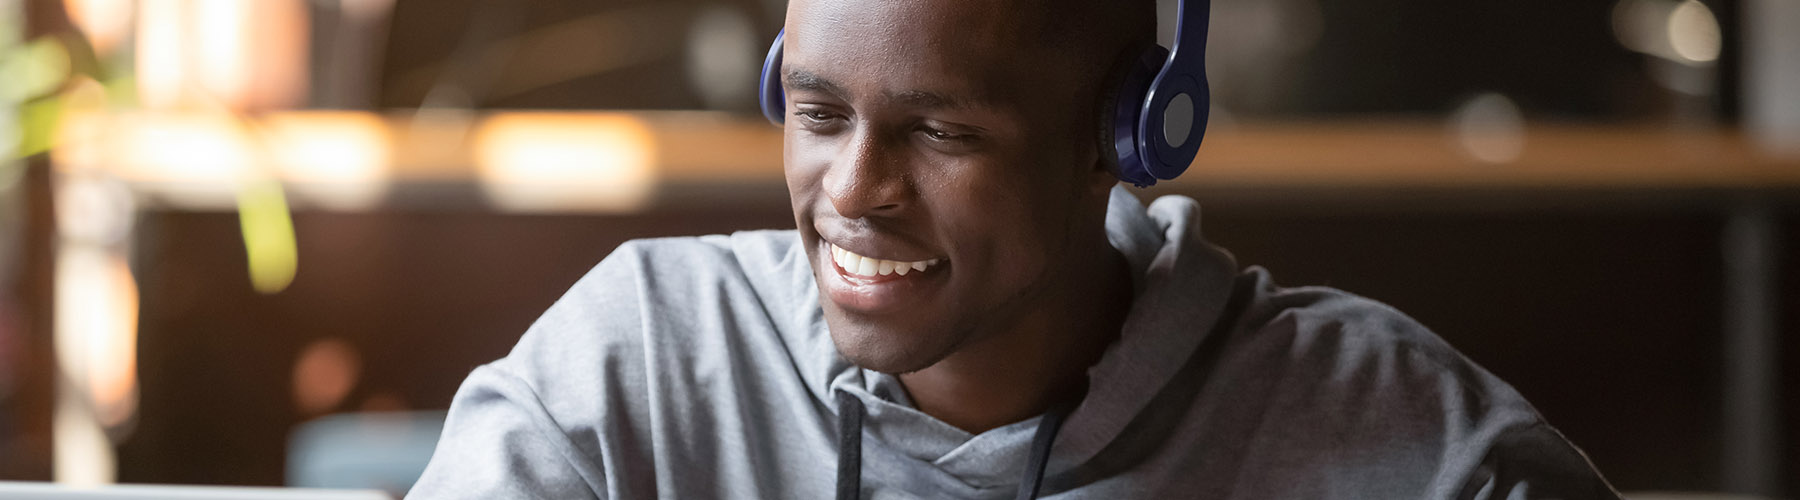 Smiling african young man student wearing headphones study online